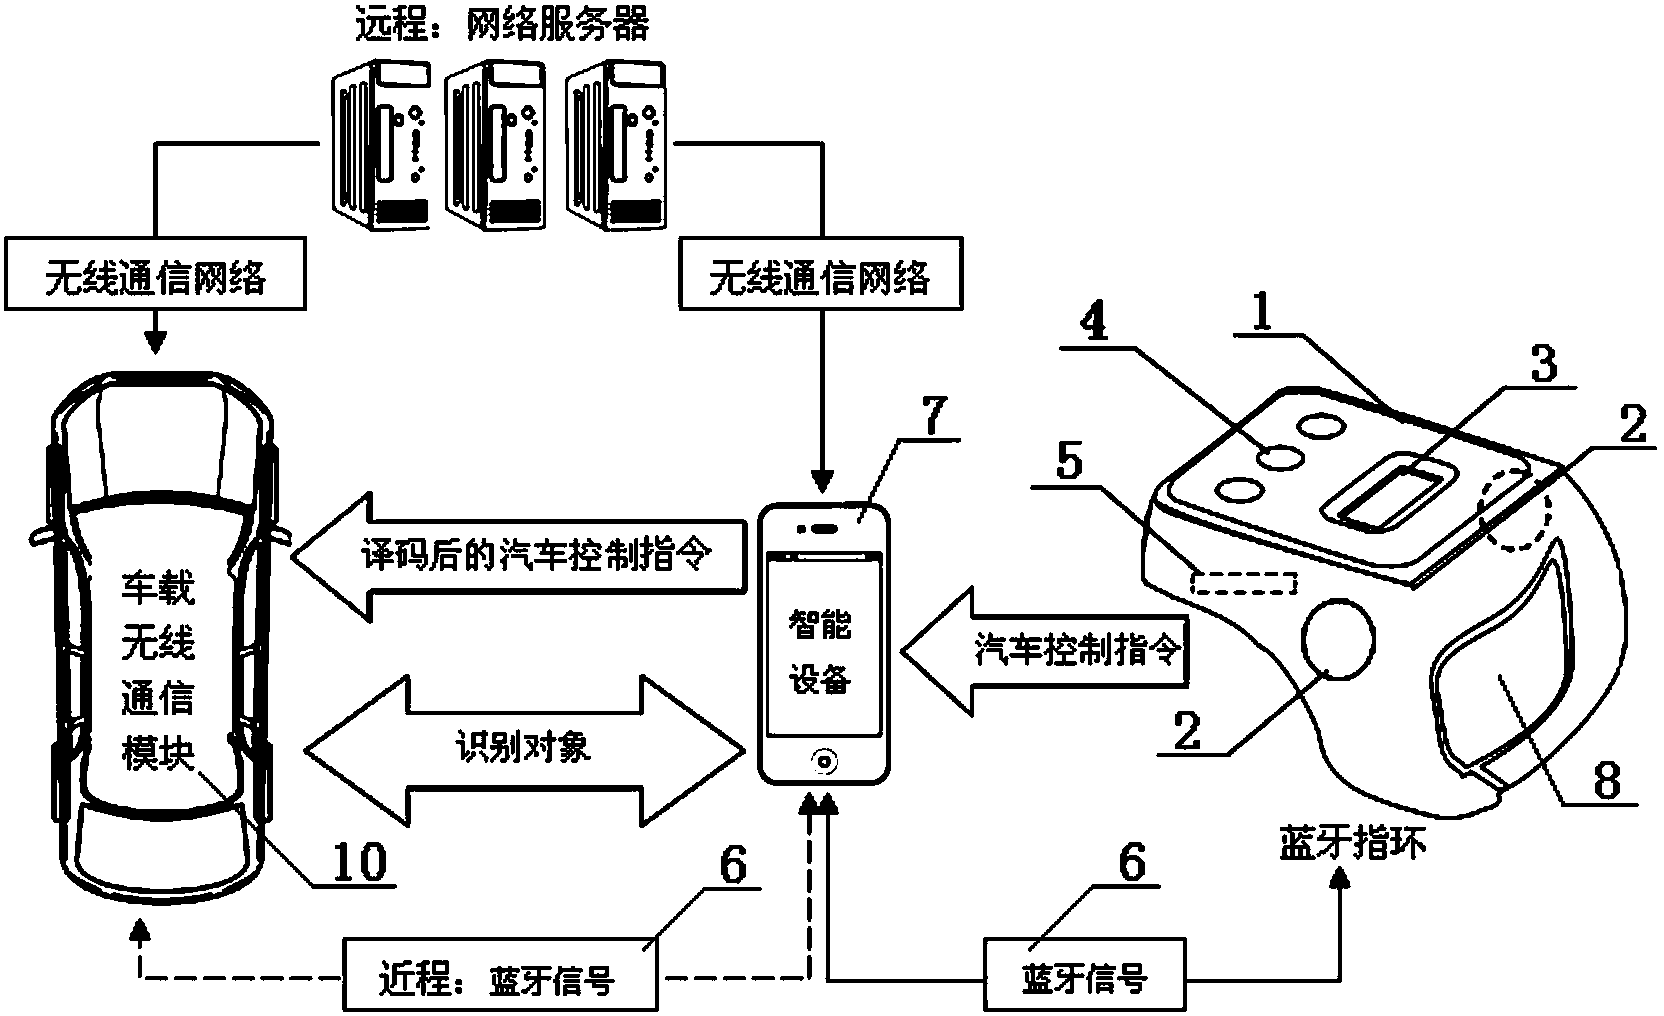 Application of Bluetooth finger ring with control key on lateral face in communication and remote control